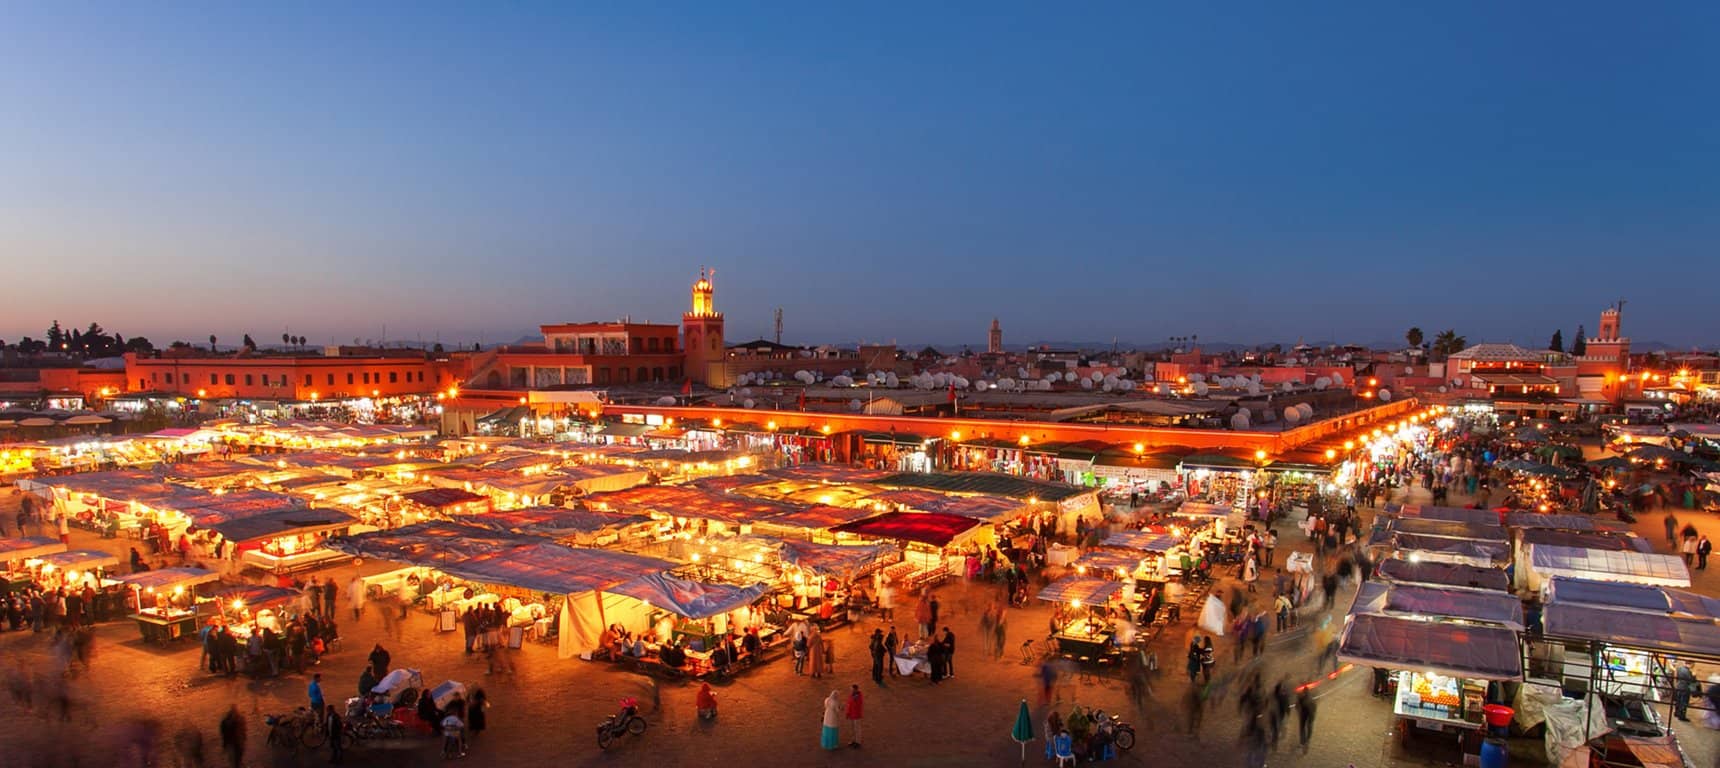 View of Marrakech square bathed in twilight's red glow, capturing the vibrant evening atmosphere.